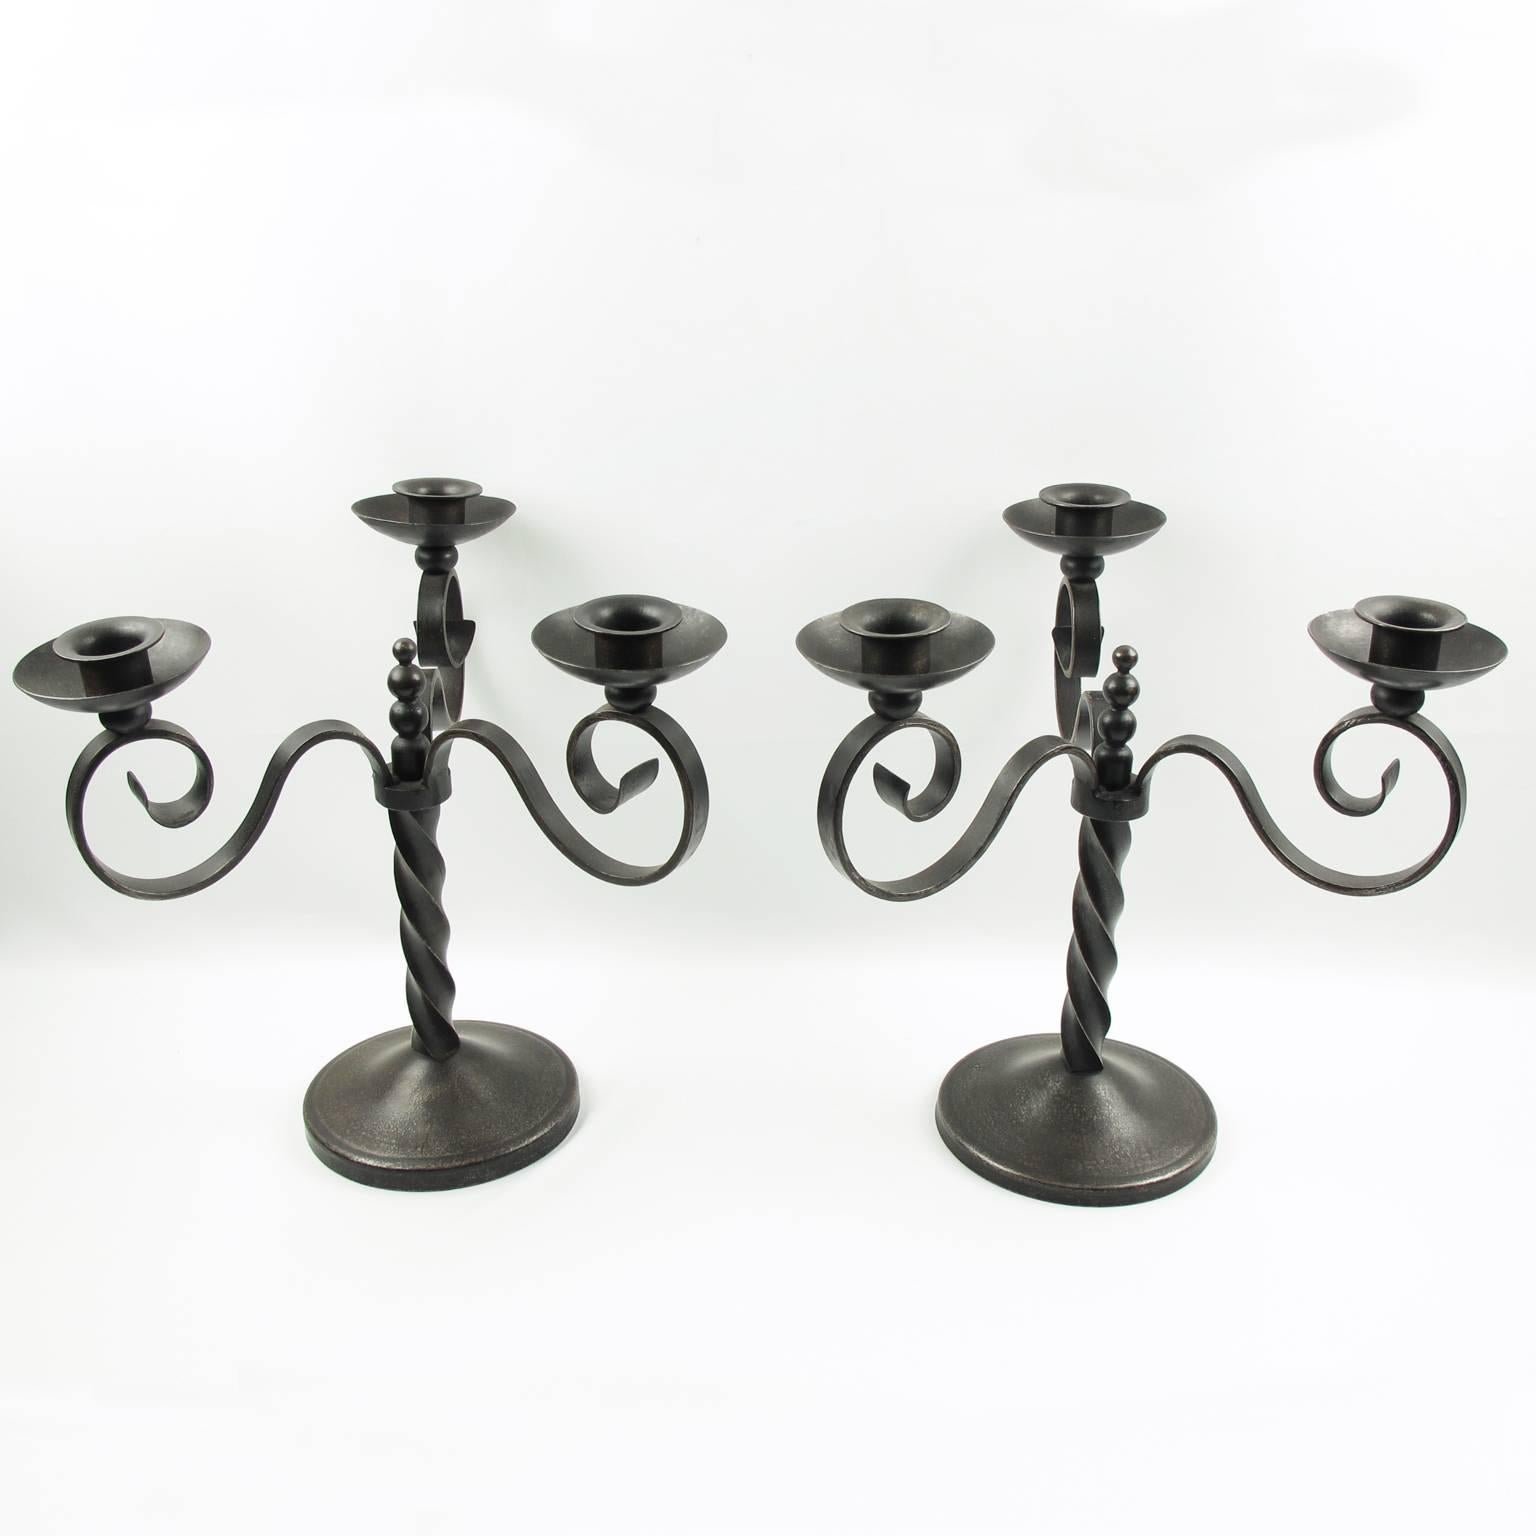 Pair of large wrought iron candelabras by Charles Piguet (1887-1942). Elegant three branches classic medieval inspired shape with original gunmetal patina. The candles-holders are both signed on base with monogram 